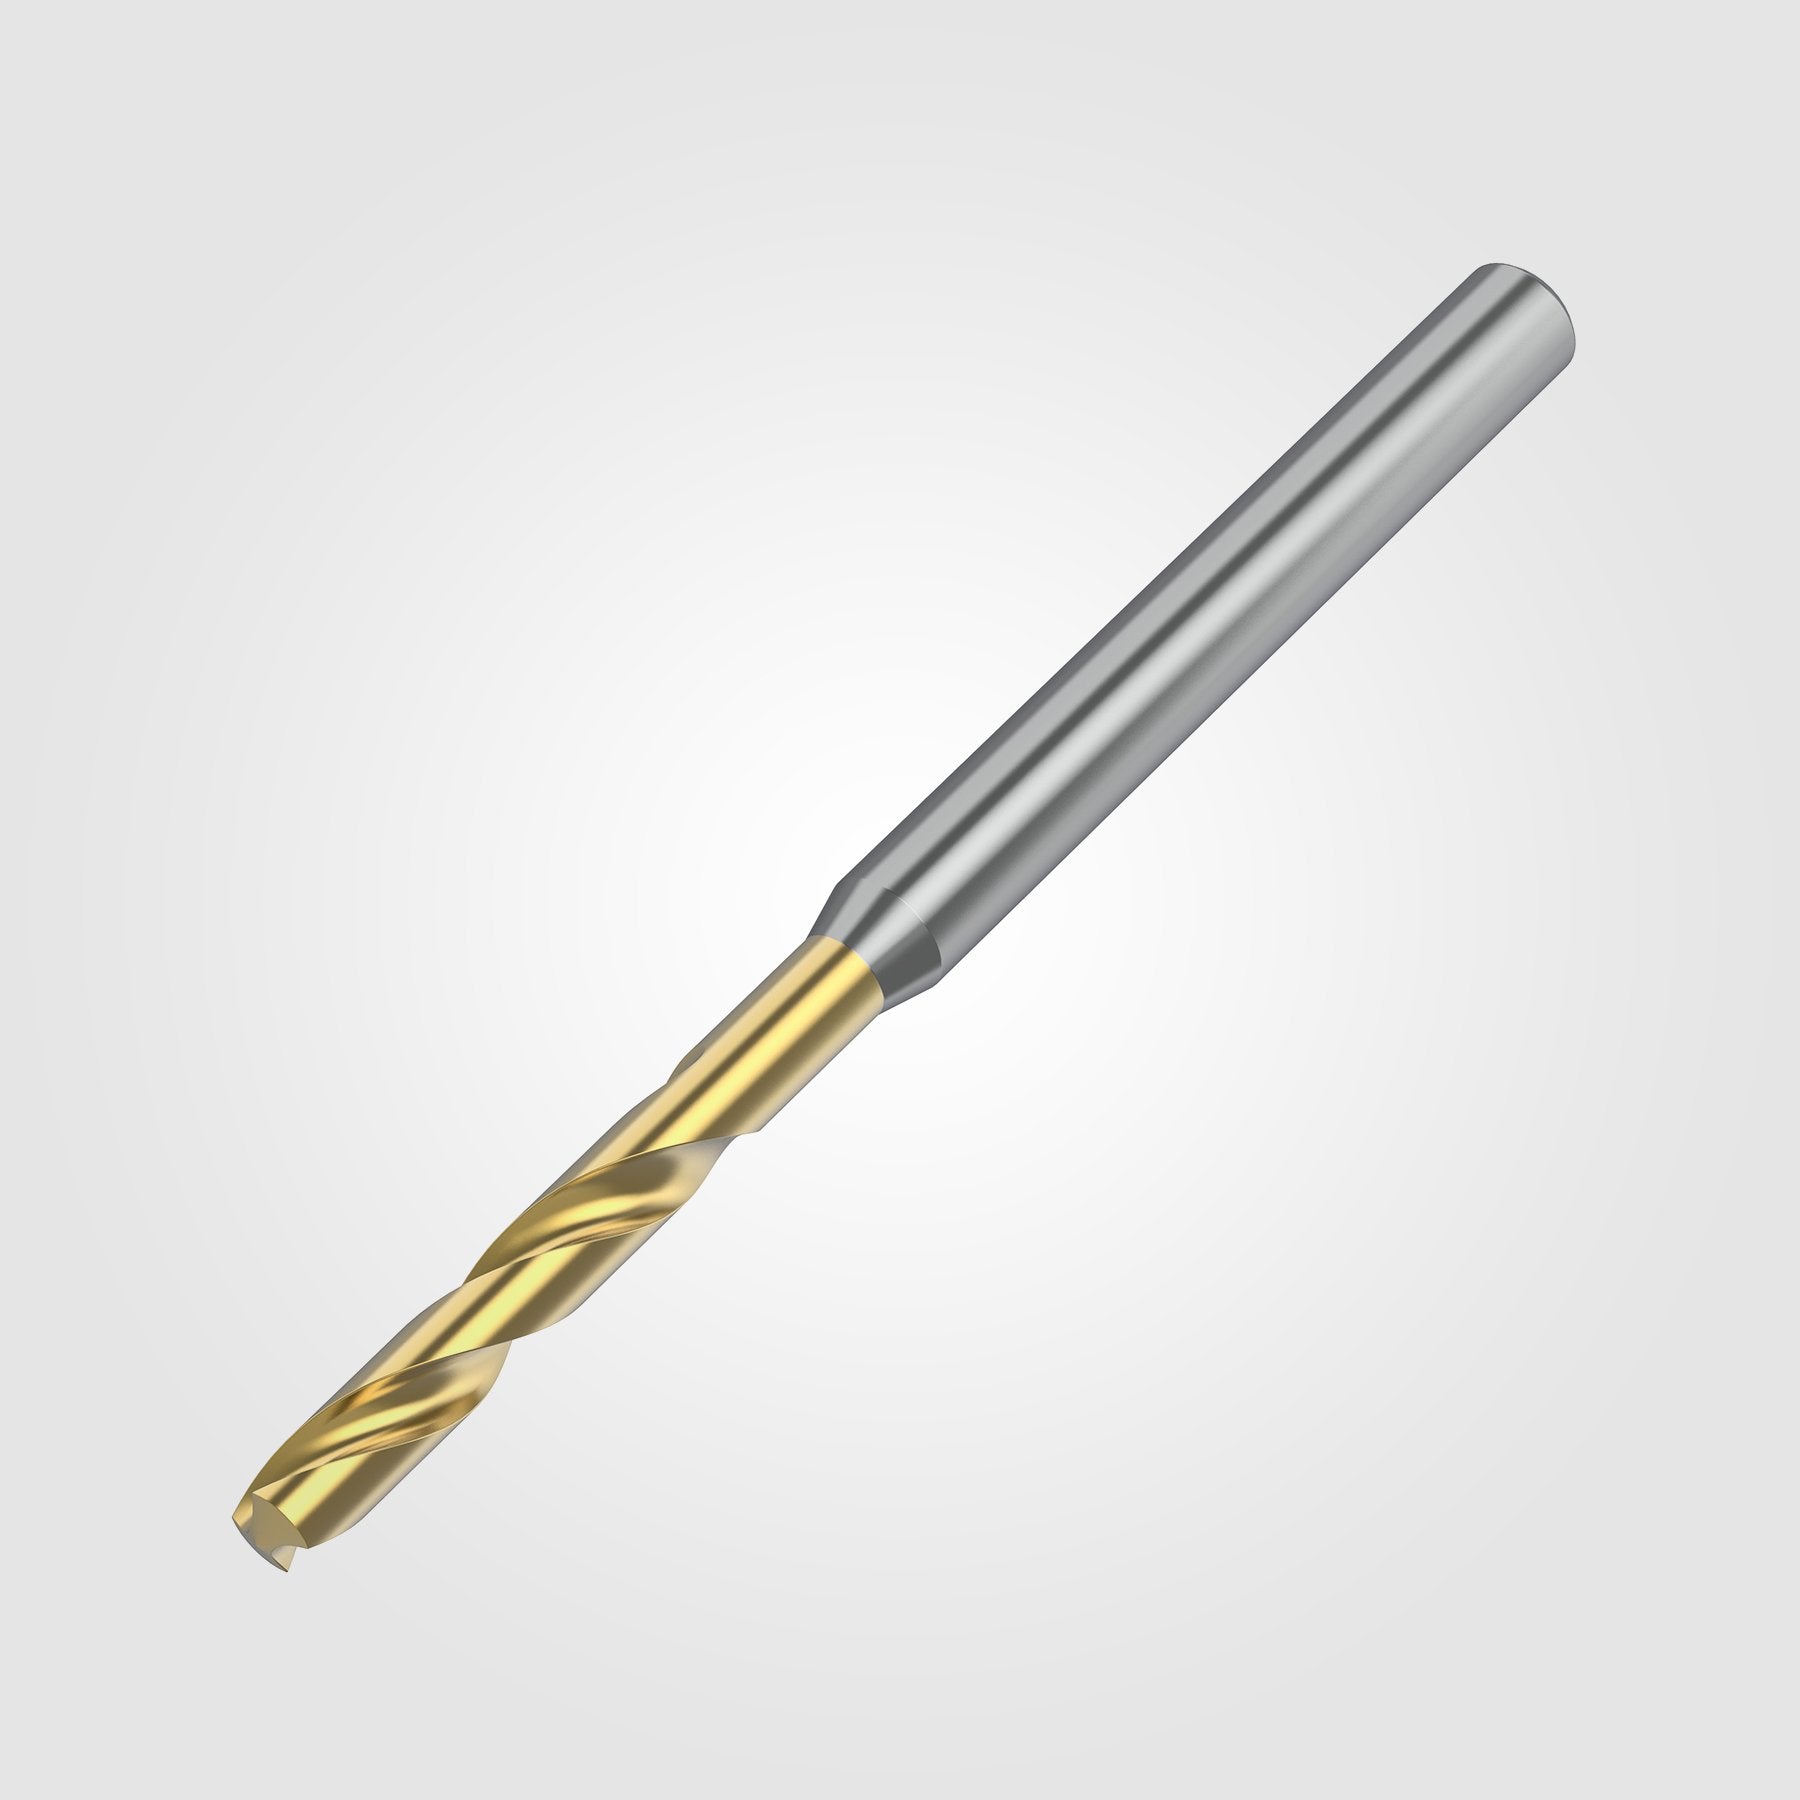 GOdrill (THROUGH COOLANT) | 12mm / .4724" / 3xD | SOLID CARBIDE DRILL | 4151229